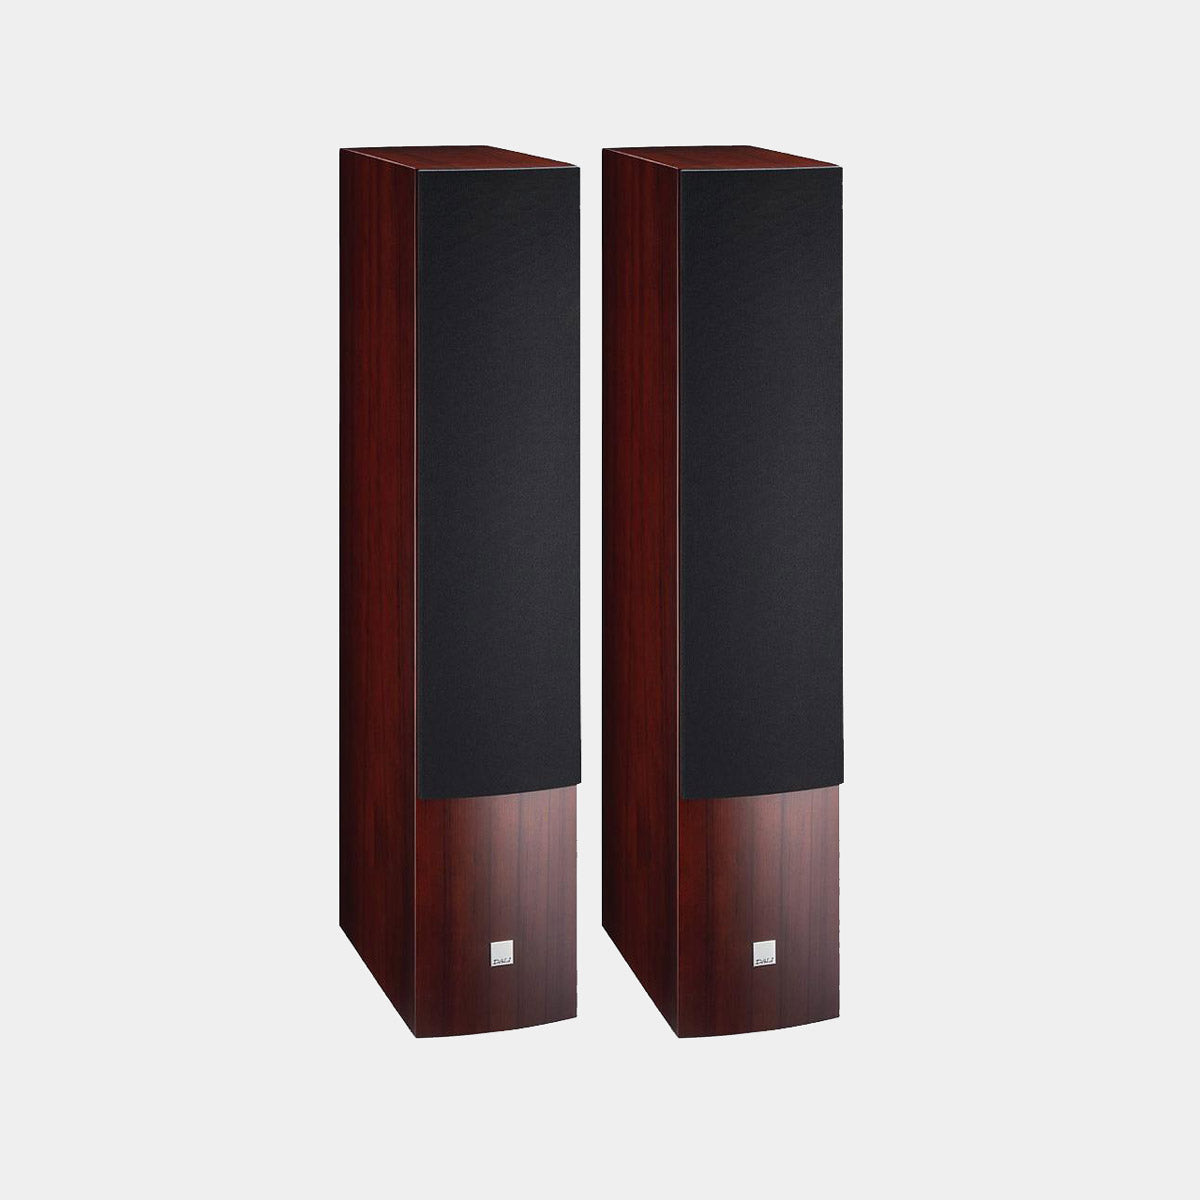 The rosso coloured rubicon 8 speakers by Dali